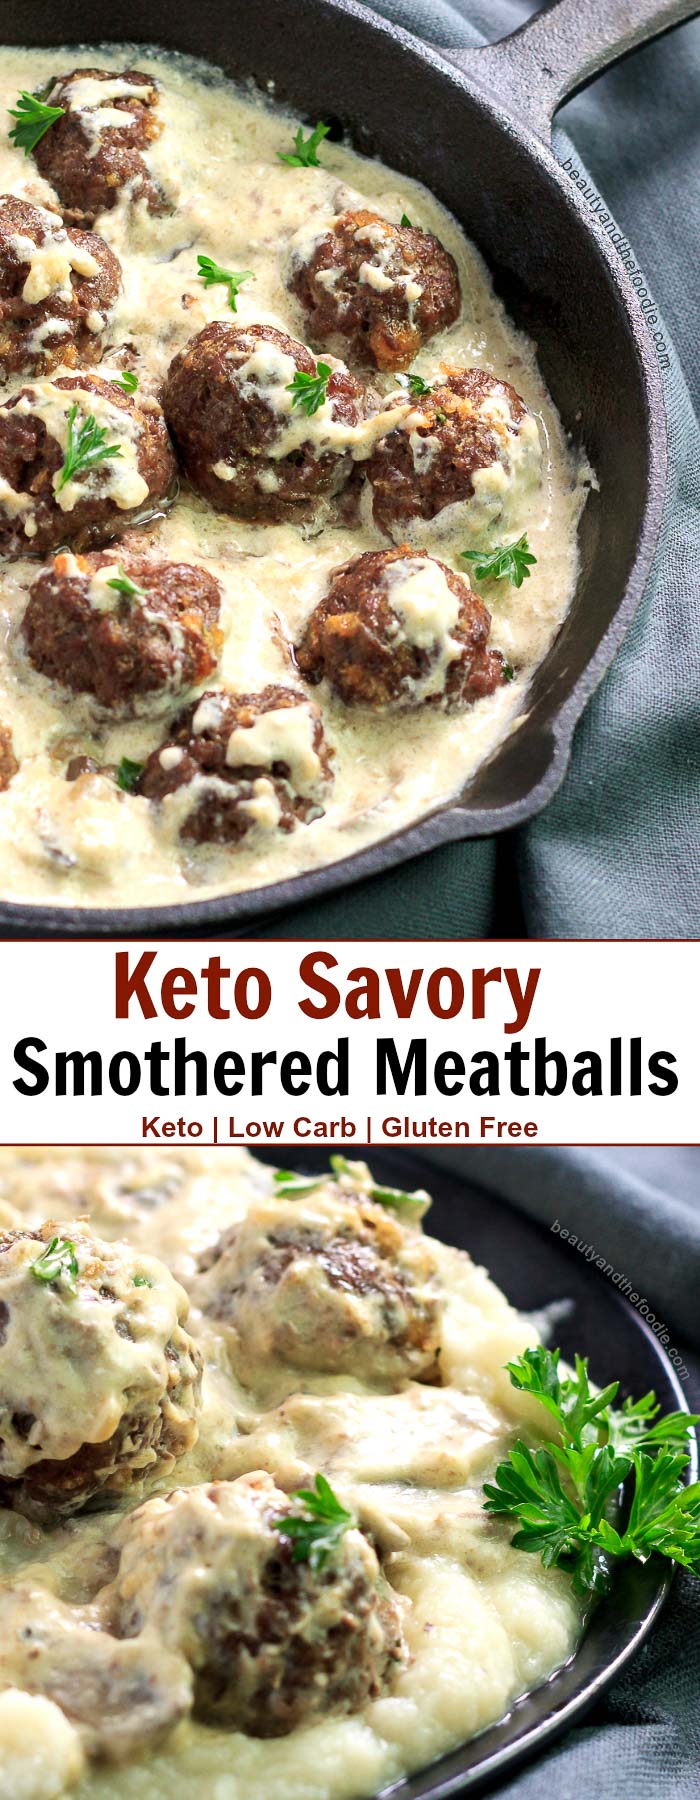 Keto Savory Smothered Meatballs- Low Carb & gluten free.